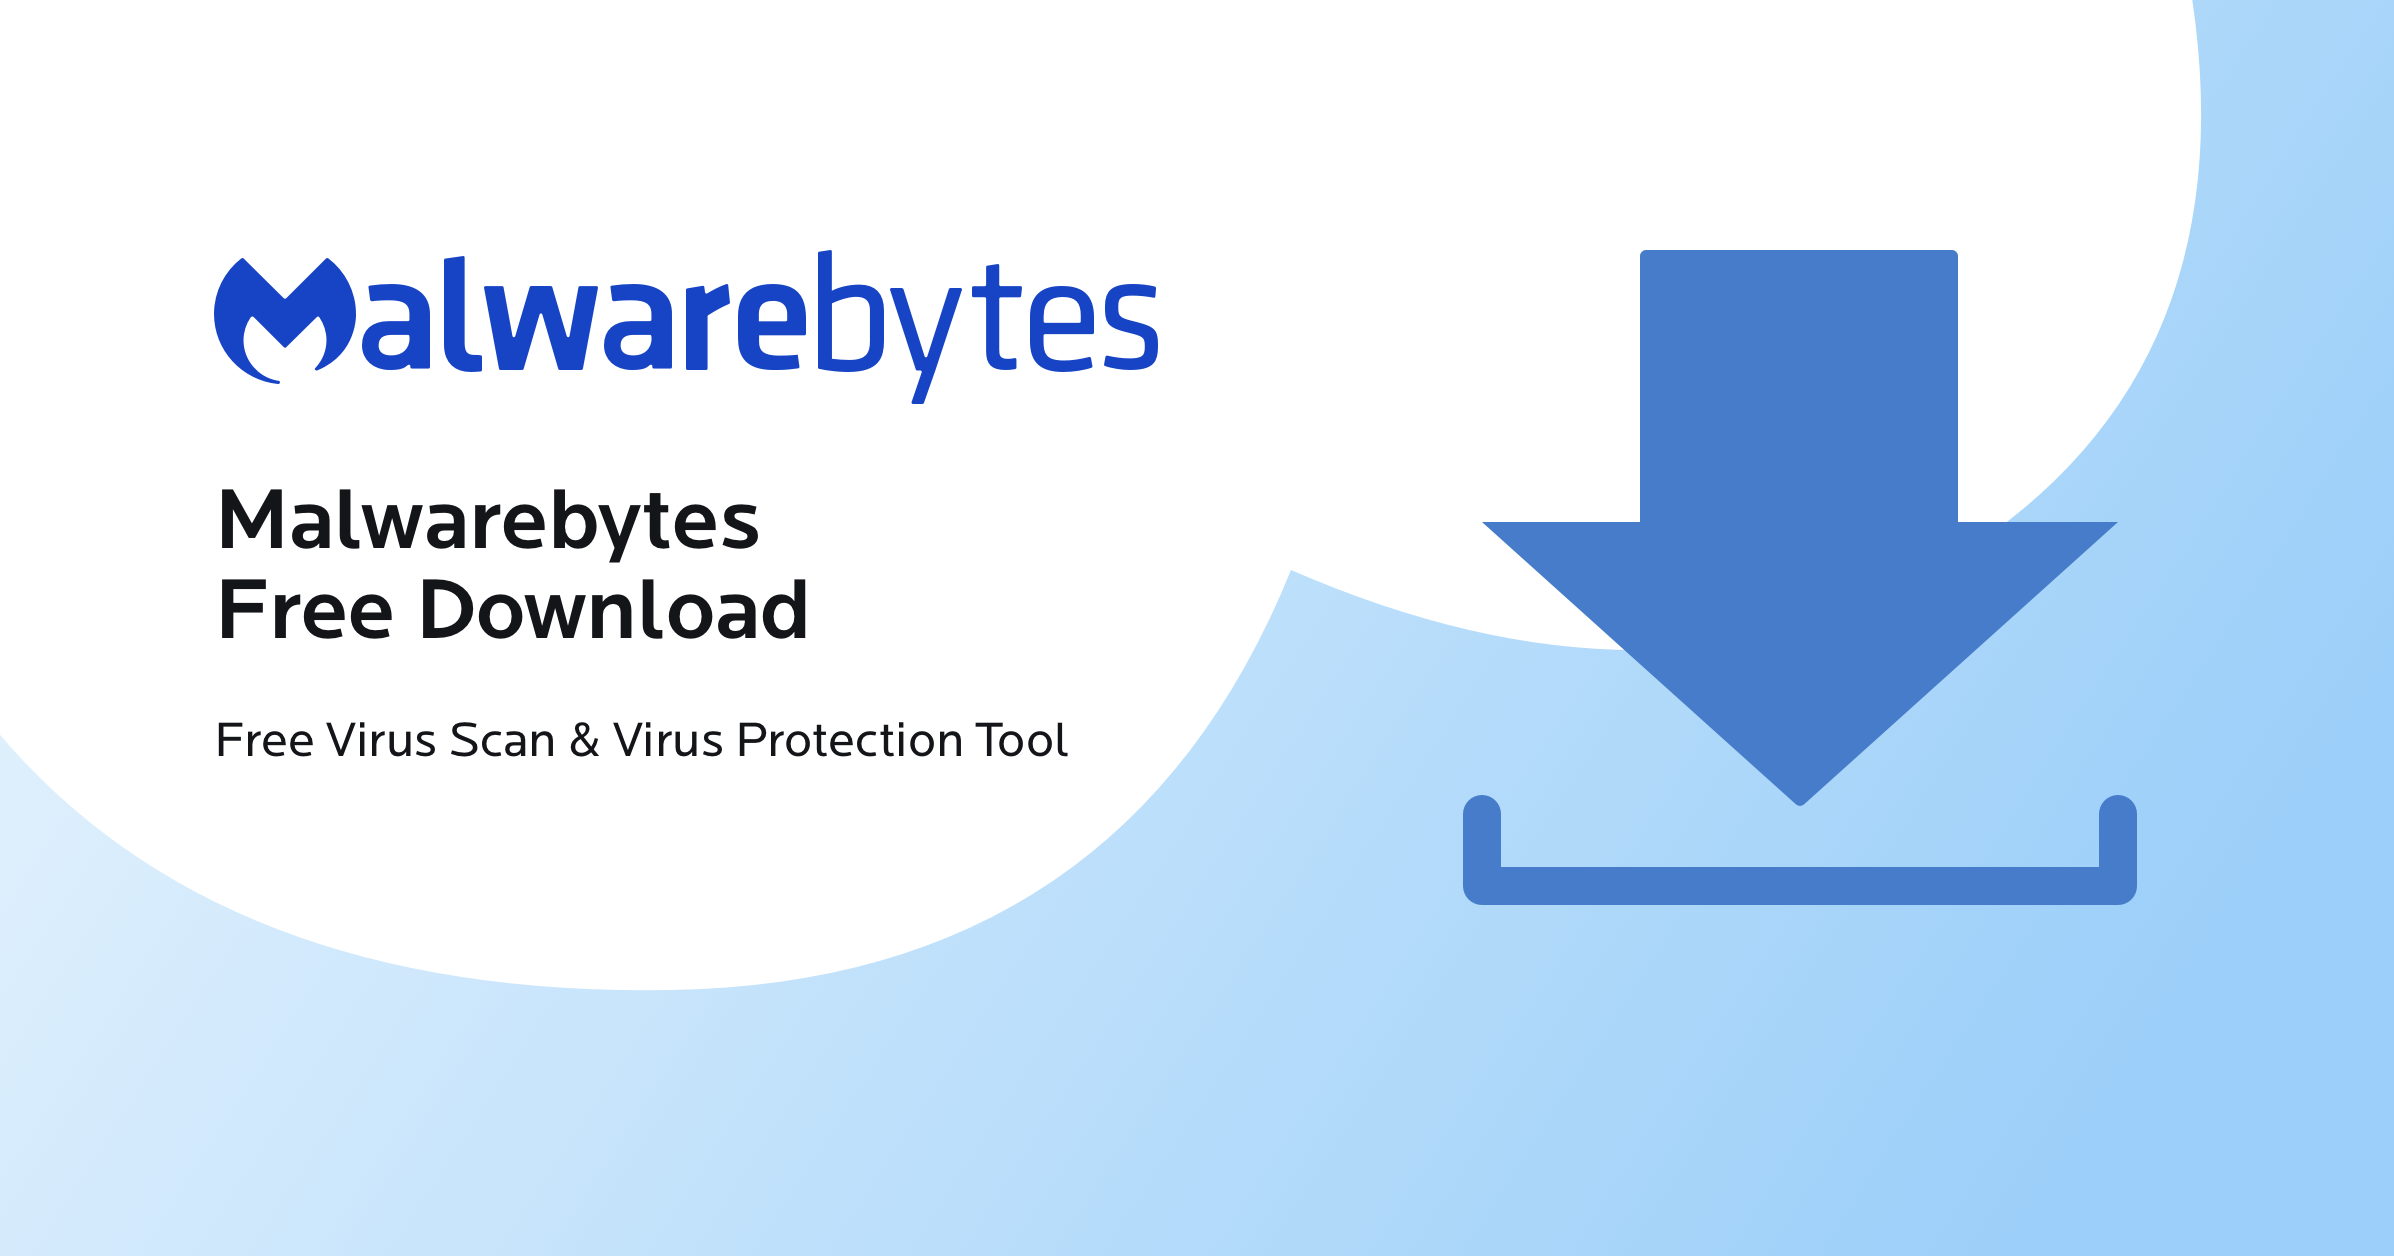 Download and install a reputable malware scanner such as Malwarebytes.
Run a full system scan to detect and remove any malware or viruses that may be causing the error.